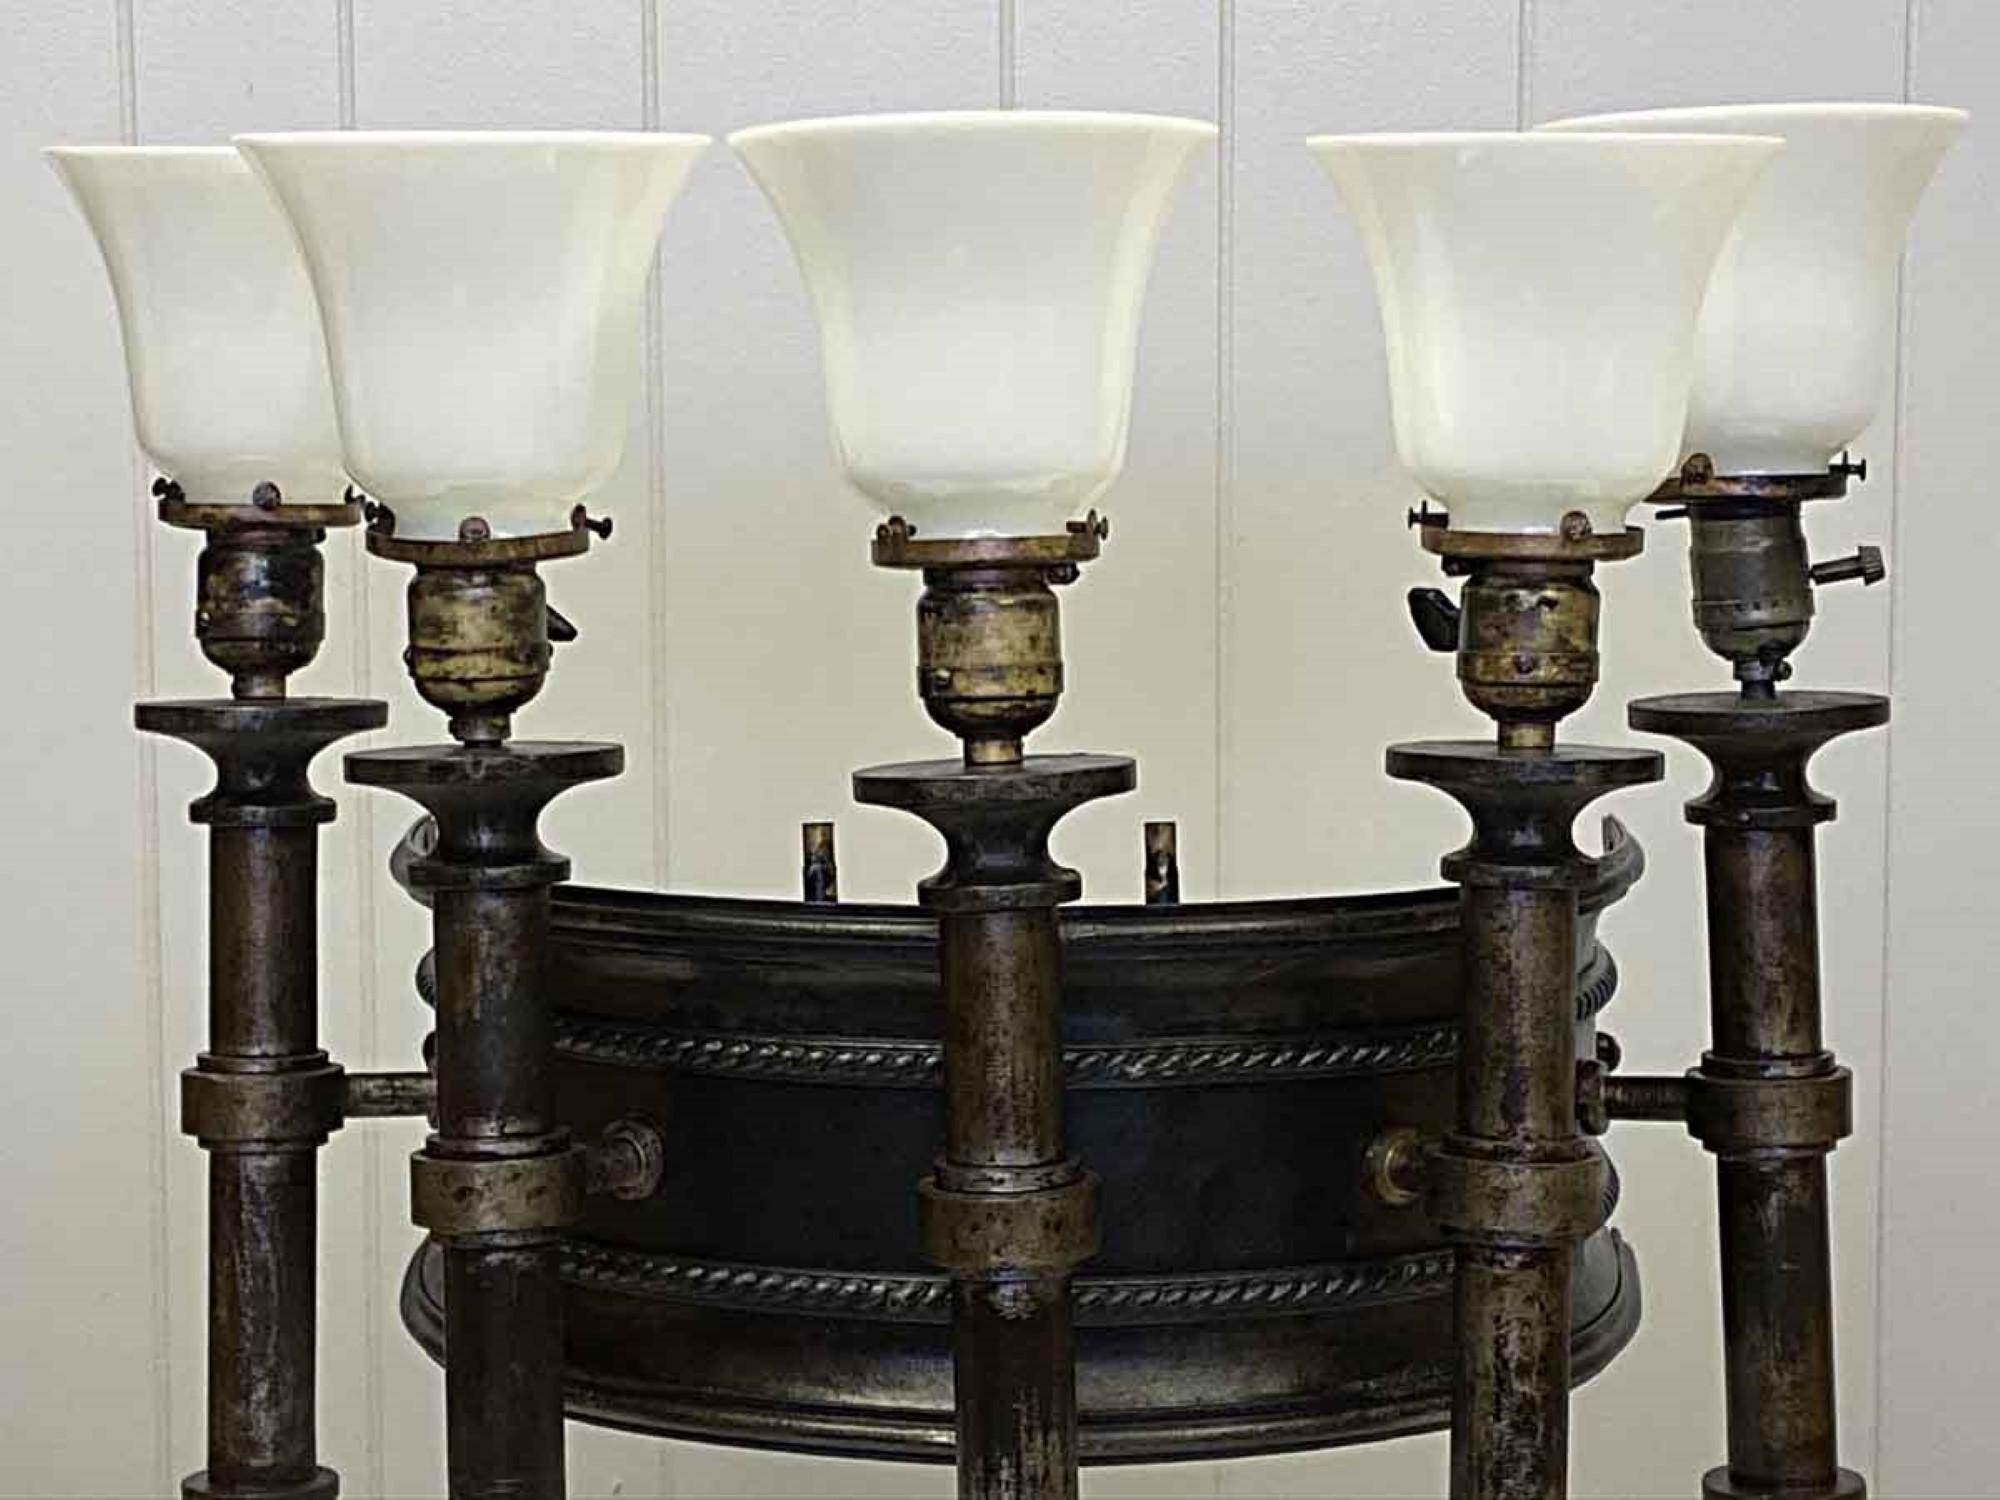 1880s majestic electrified Gothic gas sconce.. Cast iron and steel featuring five lights with new white glass shades. Cleaned and rewired. Small quantity available at time of posting. Priced each. Please inquire. Please note, this item is located in